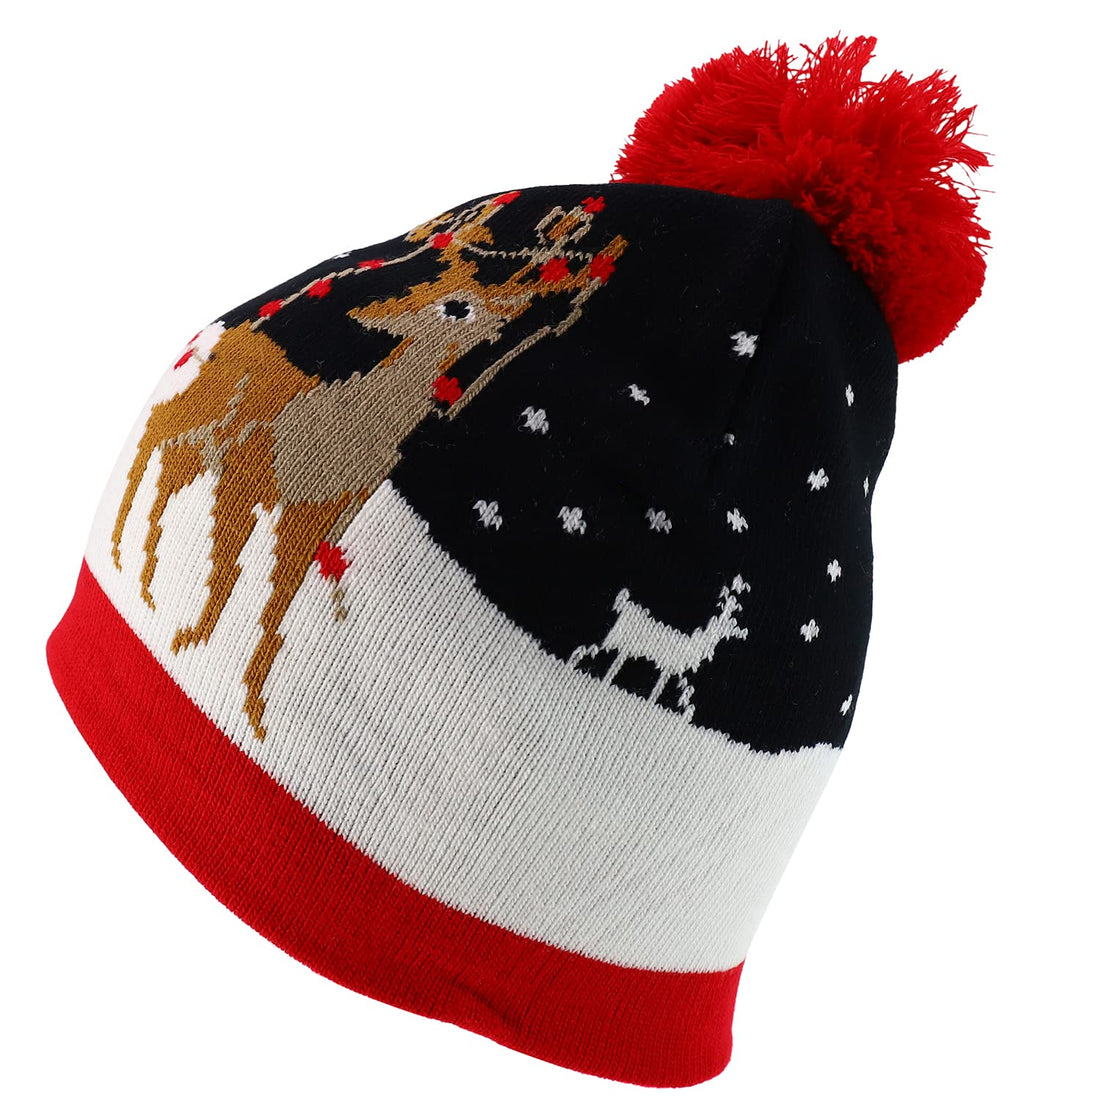 Trendy Apparel Shop 10 Styles Christmas Winter Short Beanies with Pompom